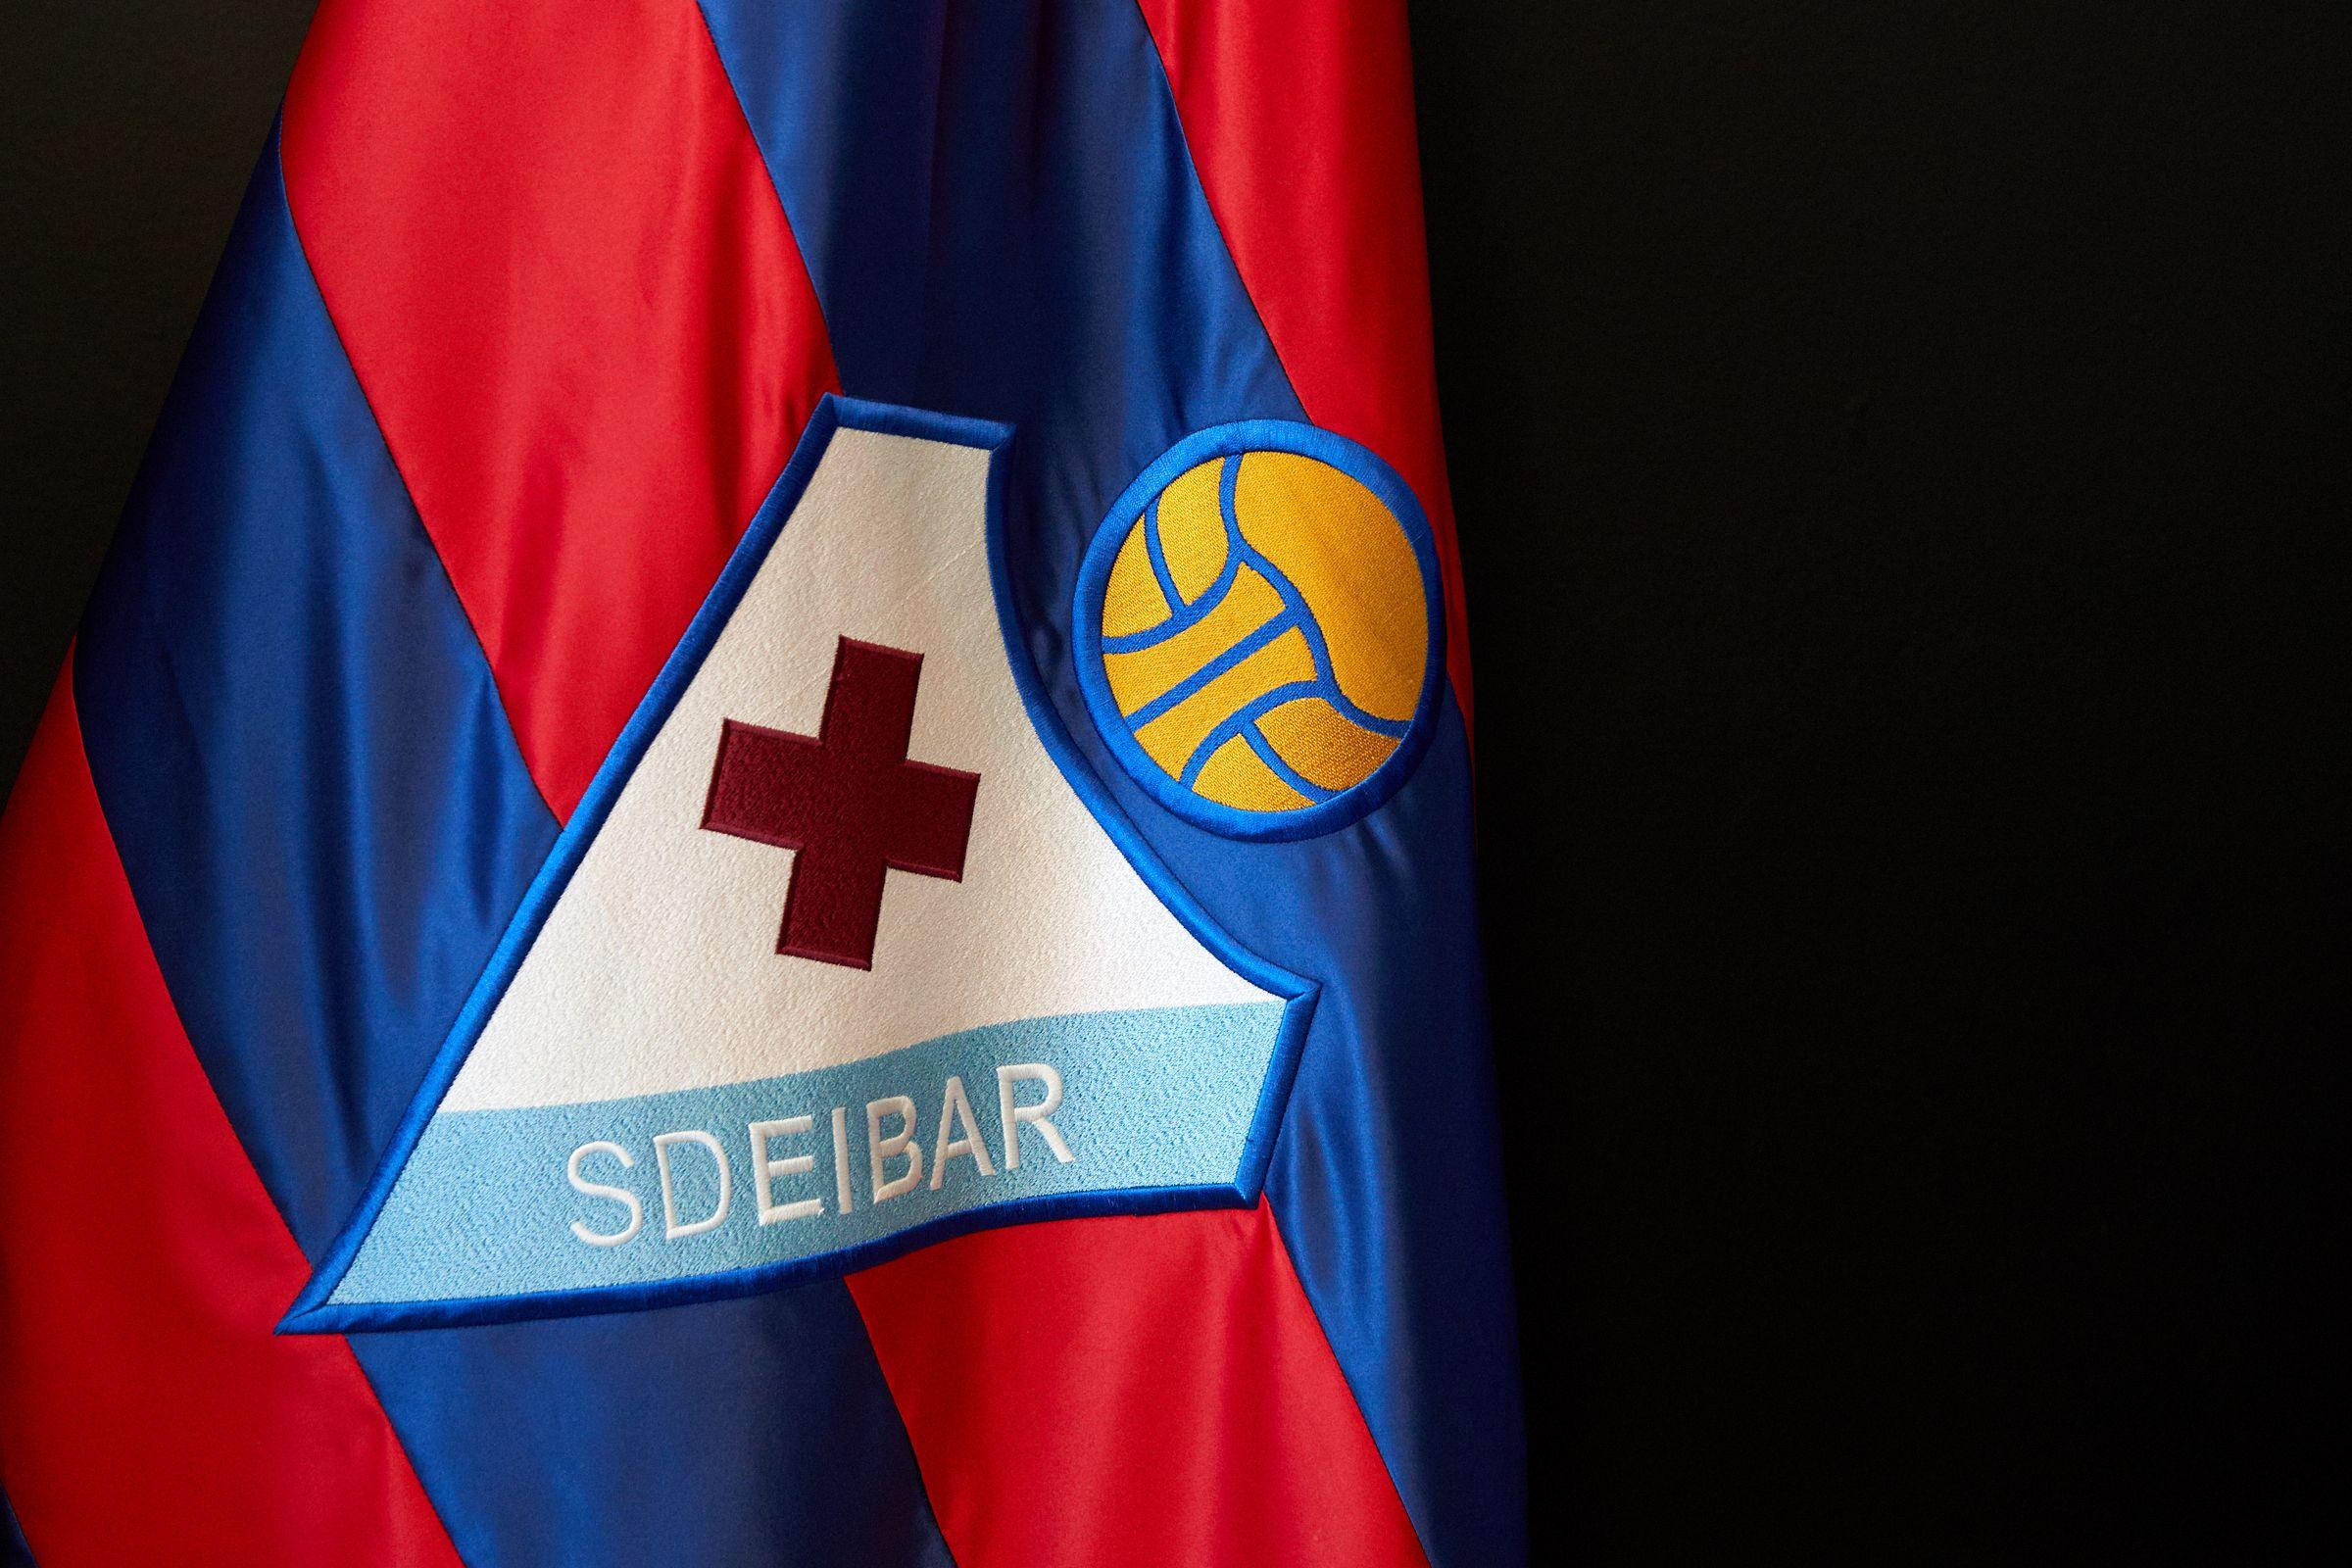 Between mountains and monsters: SD Eibar's LaLiga adventure